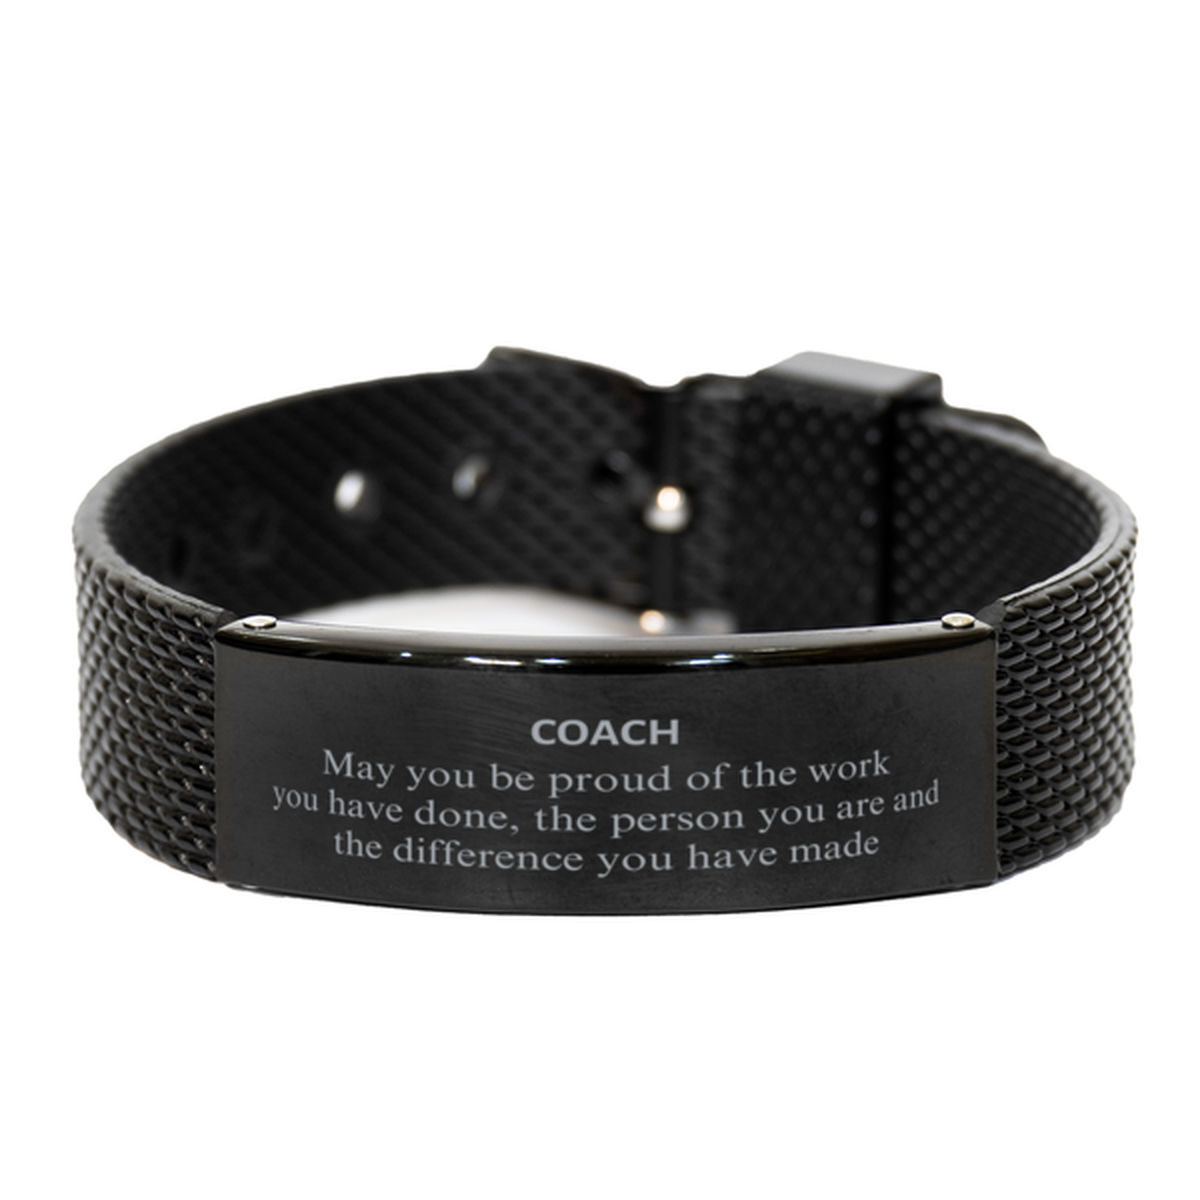 Coach May you be proud of the work you have done, Retirement Coach Black Shark Mesh Bracelet for Colleague Appreciation Gifts Amazing for Coach